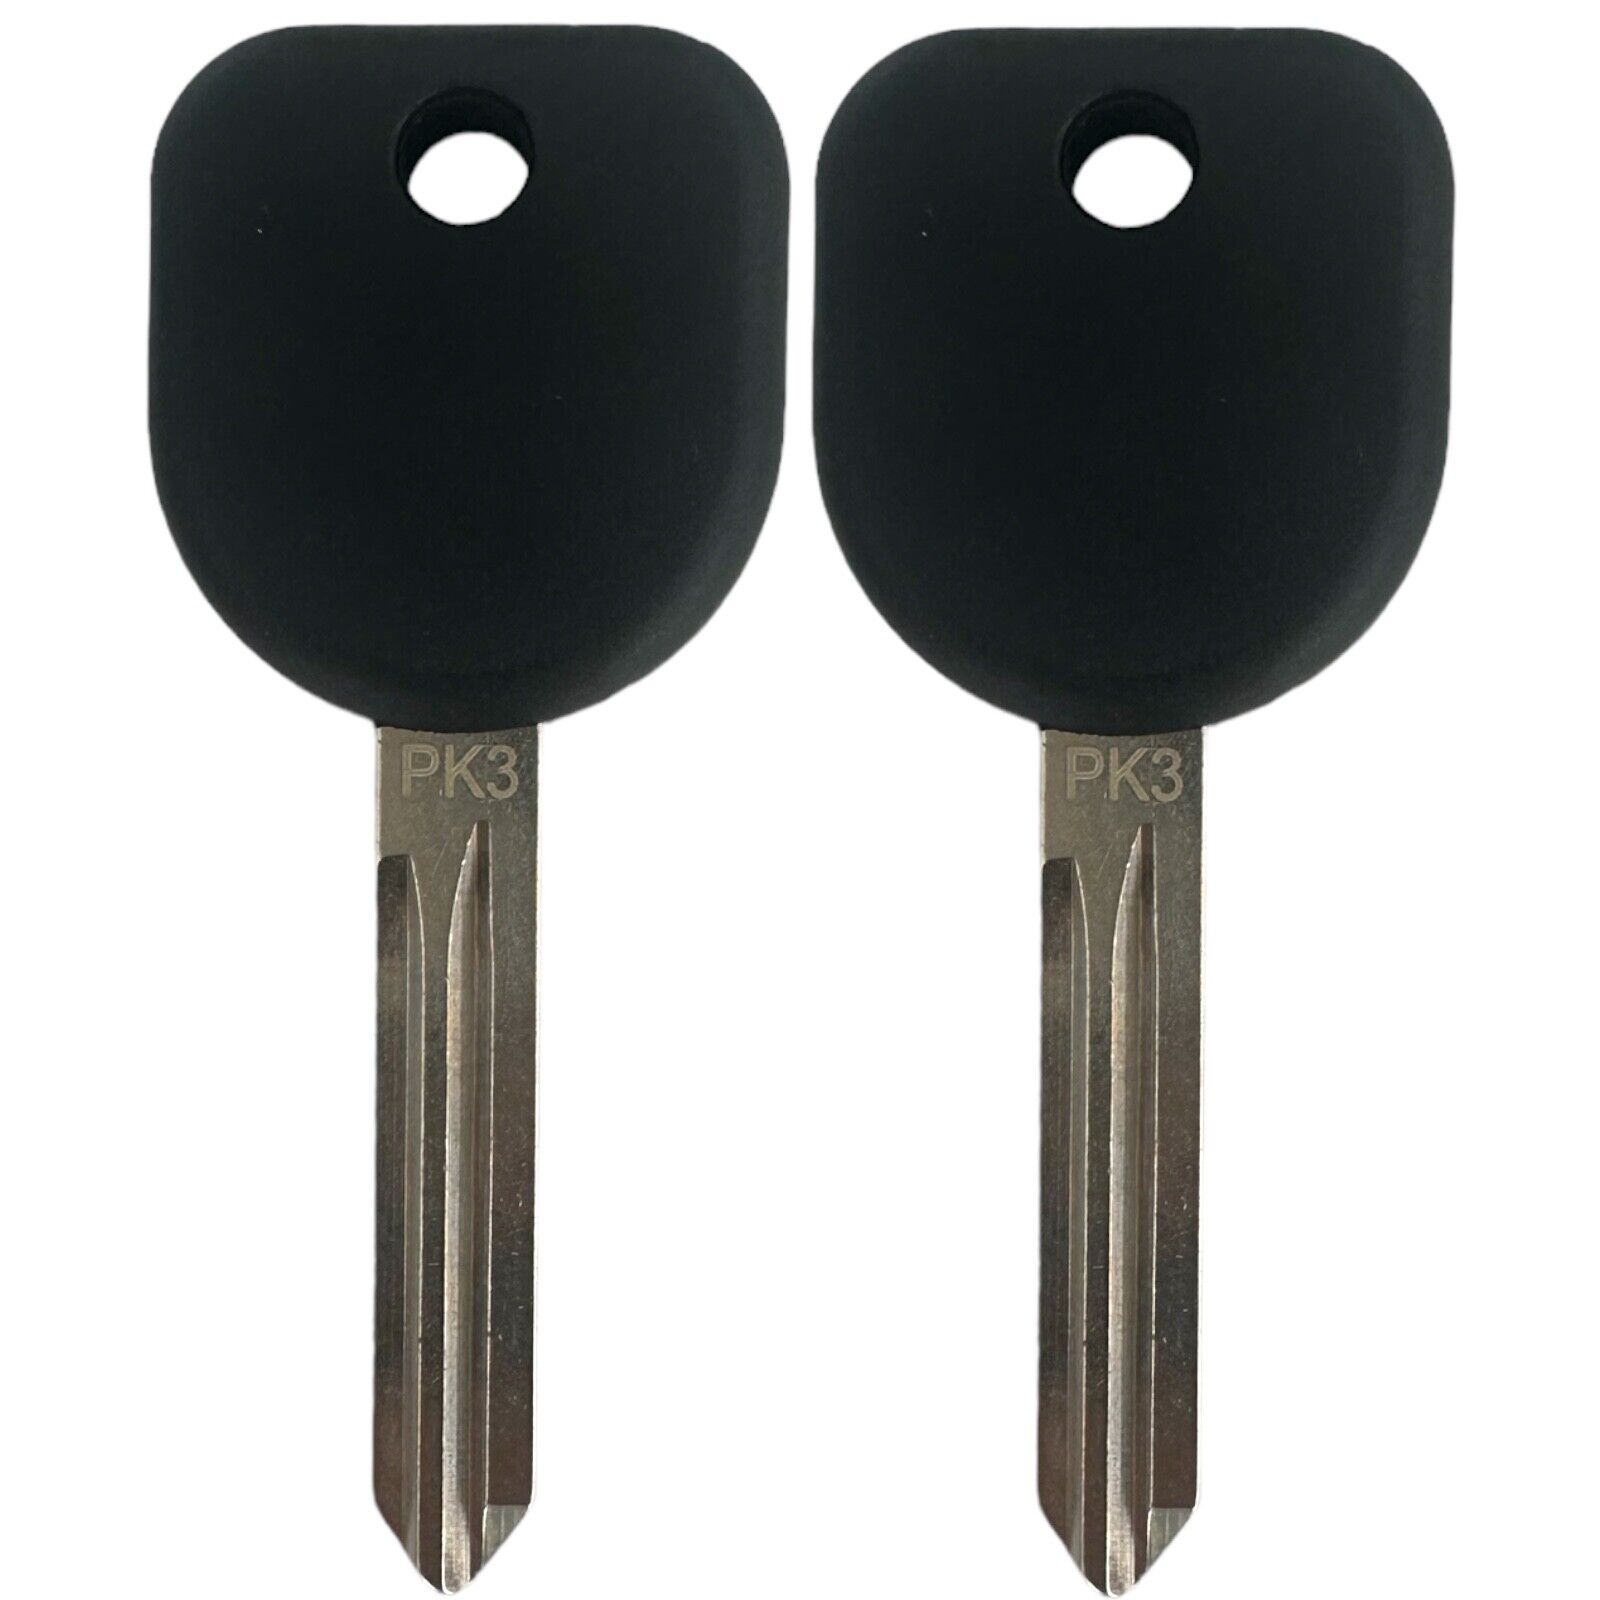 New Uncut Blank Chipped Transponder Key Replacement for GM PK3 Z Keyway (2 Pack)